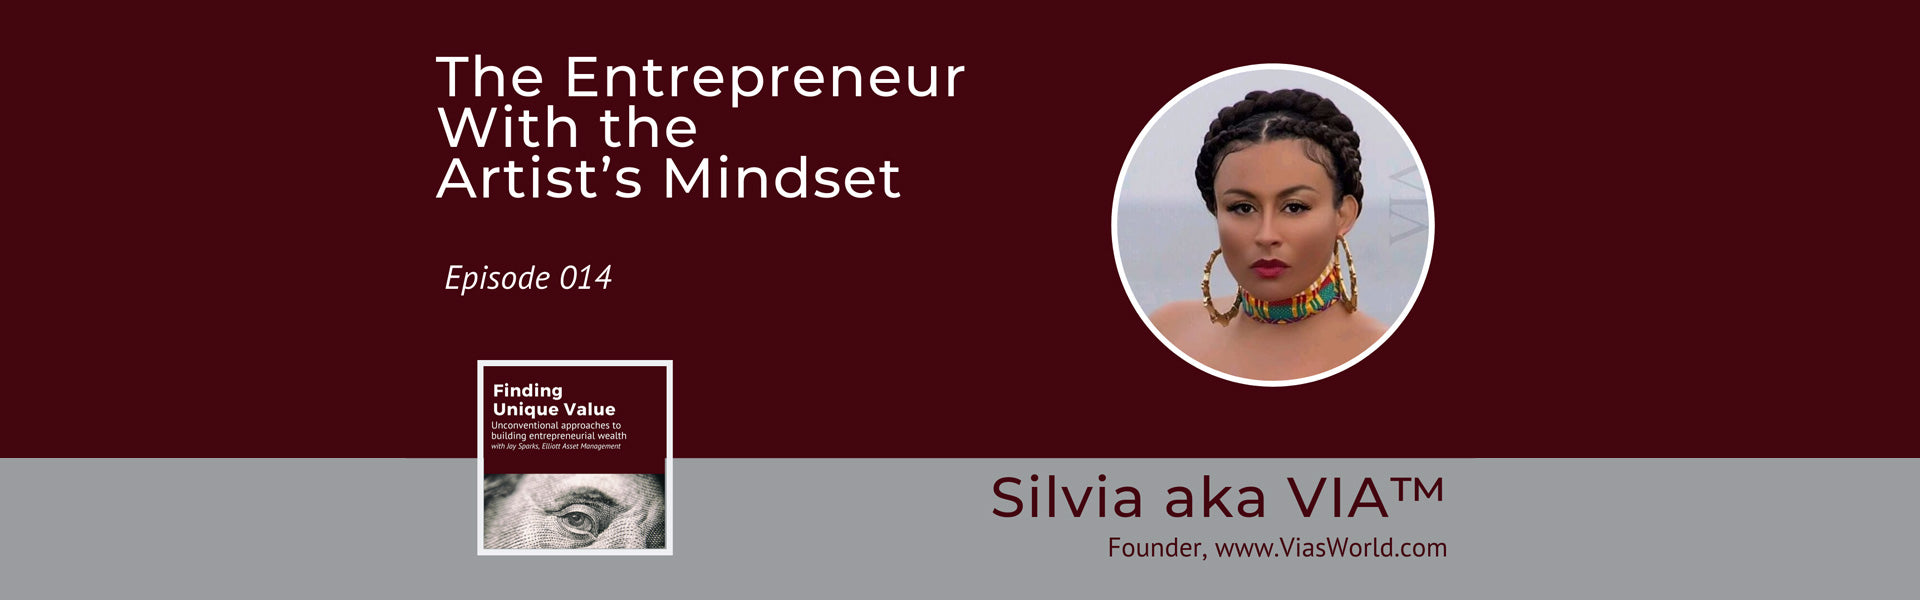 The Entrepreneur With the Artist’s Mindset